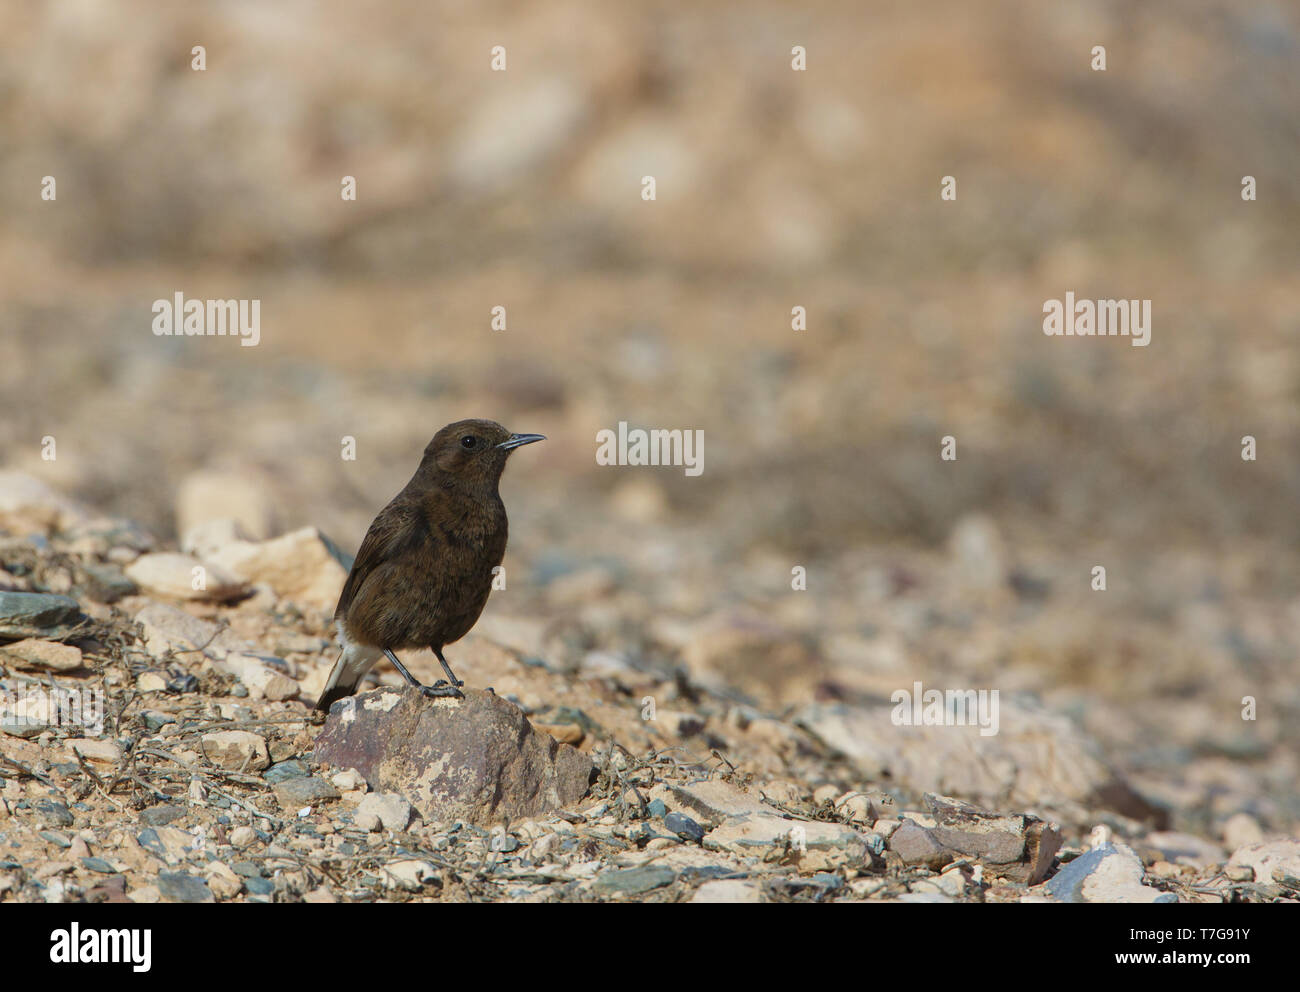 Female Black Wheatear (Oenanthe leucura) standing on a rocky ground in Morocco. Stock Photo